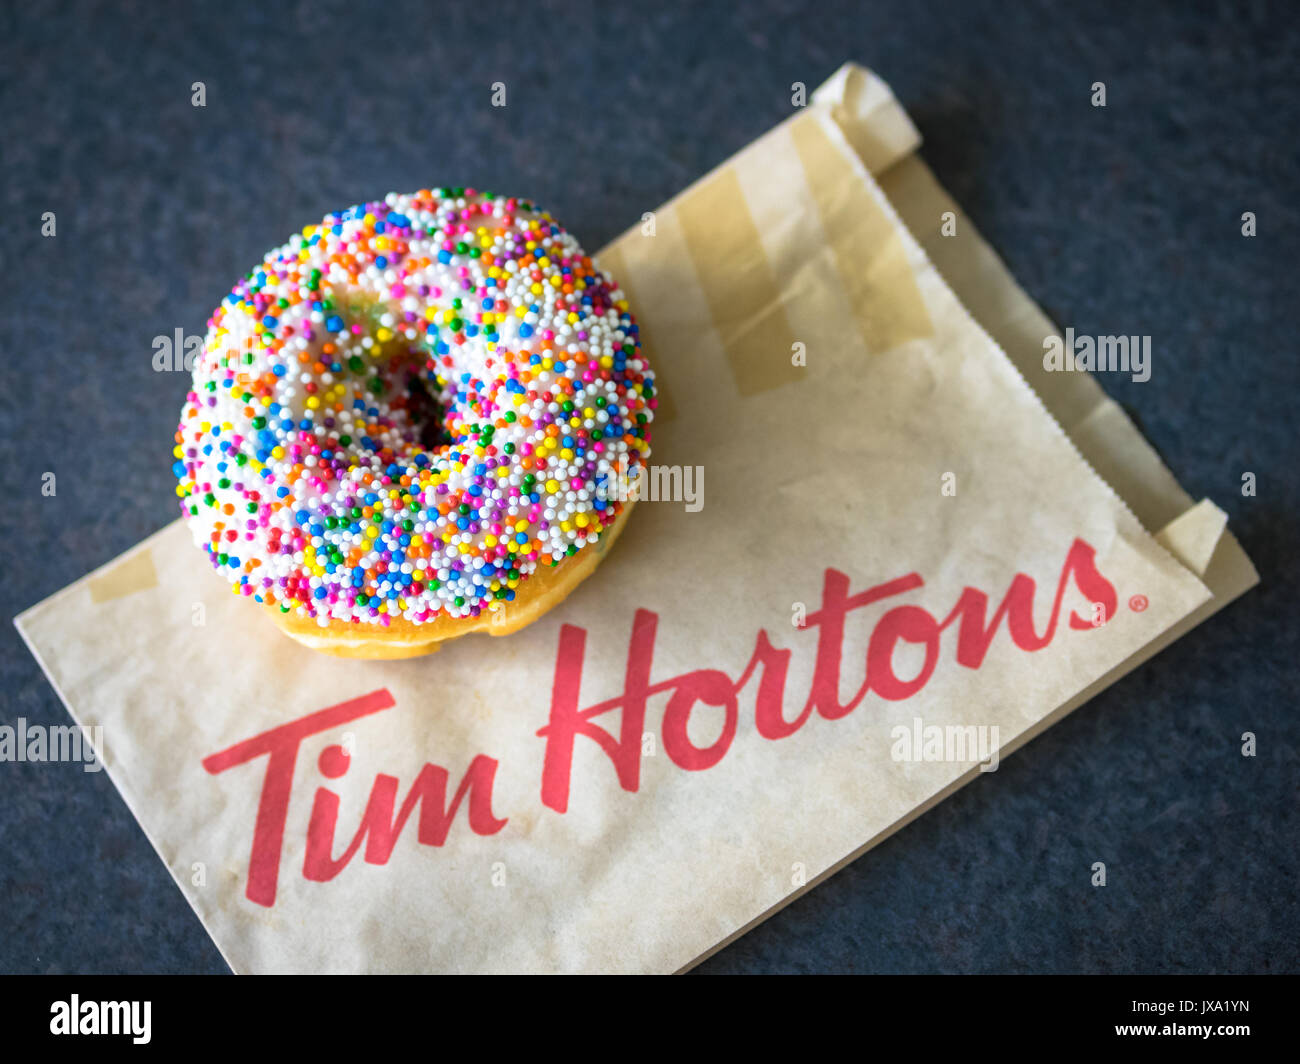 A vanilla dip donut (sprinkle donut, rainbow sprinkle donut) from Tim Hortons, a popular Canadian fast food restaurant and donut shop. Stock Photo